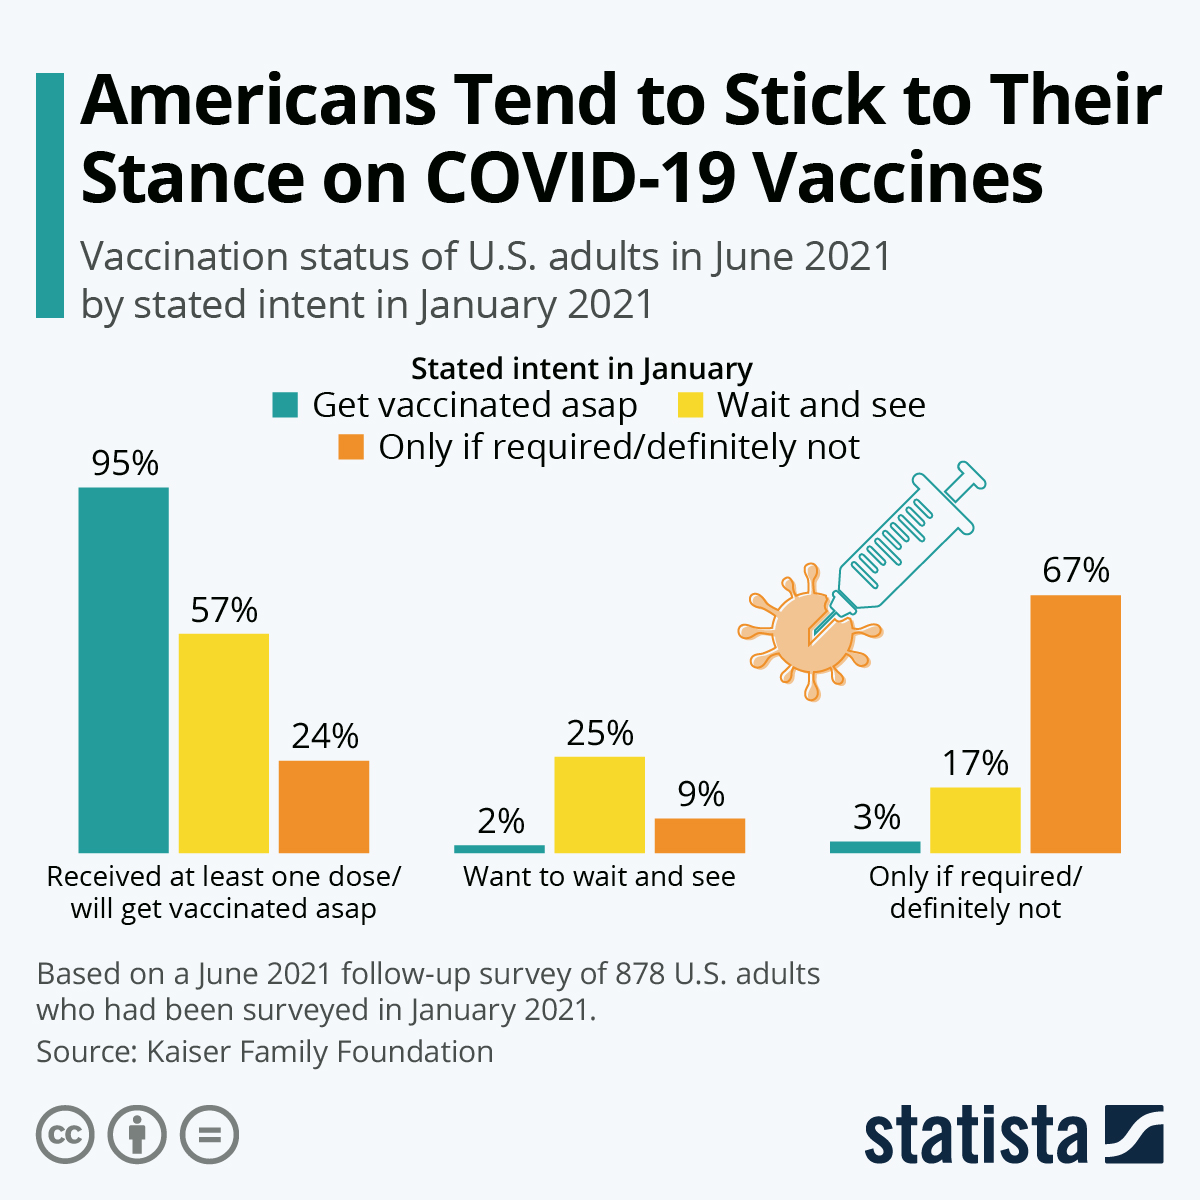 Americans Tend to Stick to Their Stance on COVID-19 Vaccines